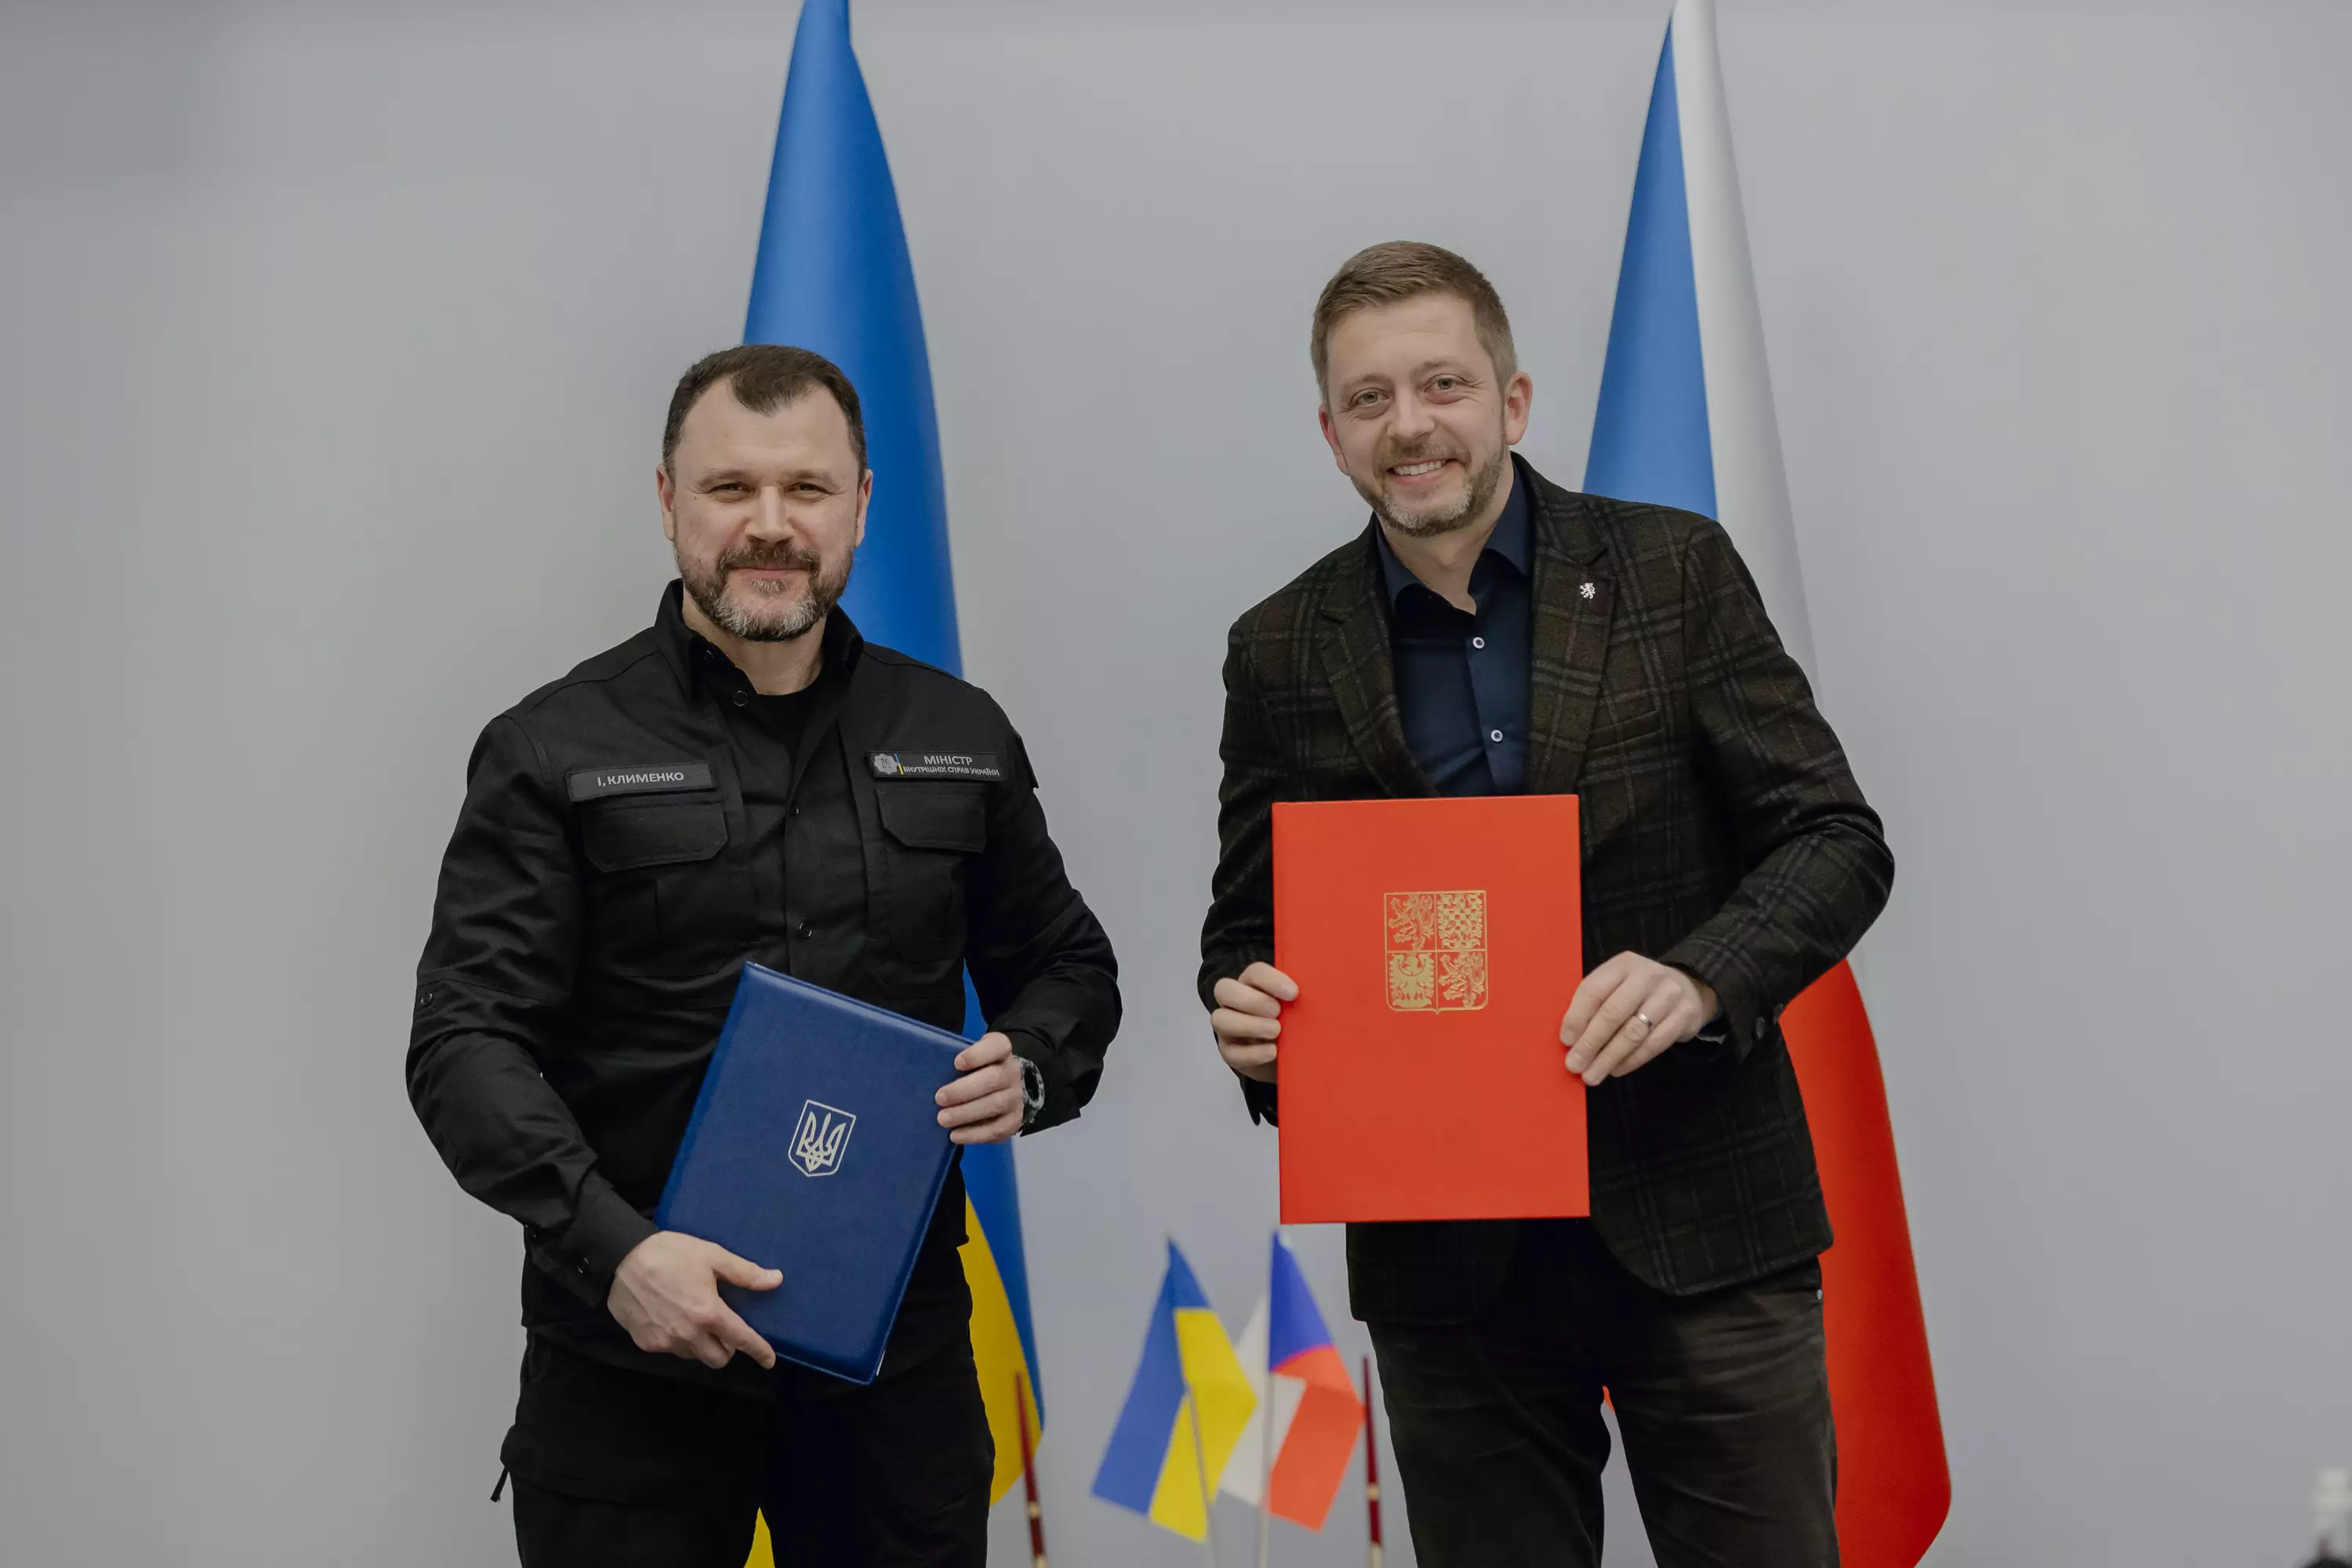 Head of the Ministry of Internal Affairs of Ukraine Ihor Klymenko held talks with the Czech delegation led by the First Deputy Prime Minister, Minister of Internal Affairs of the Czech Republic Vit Rakushan